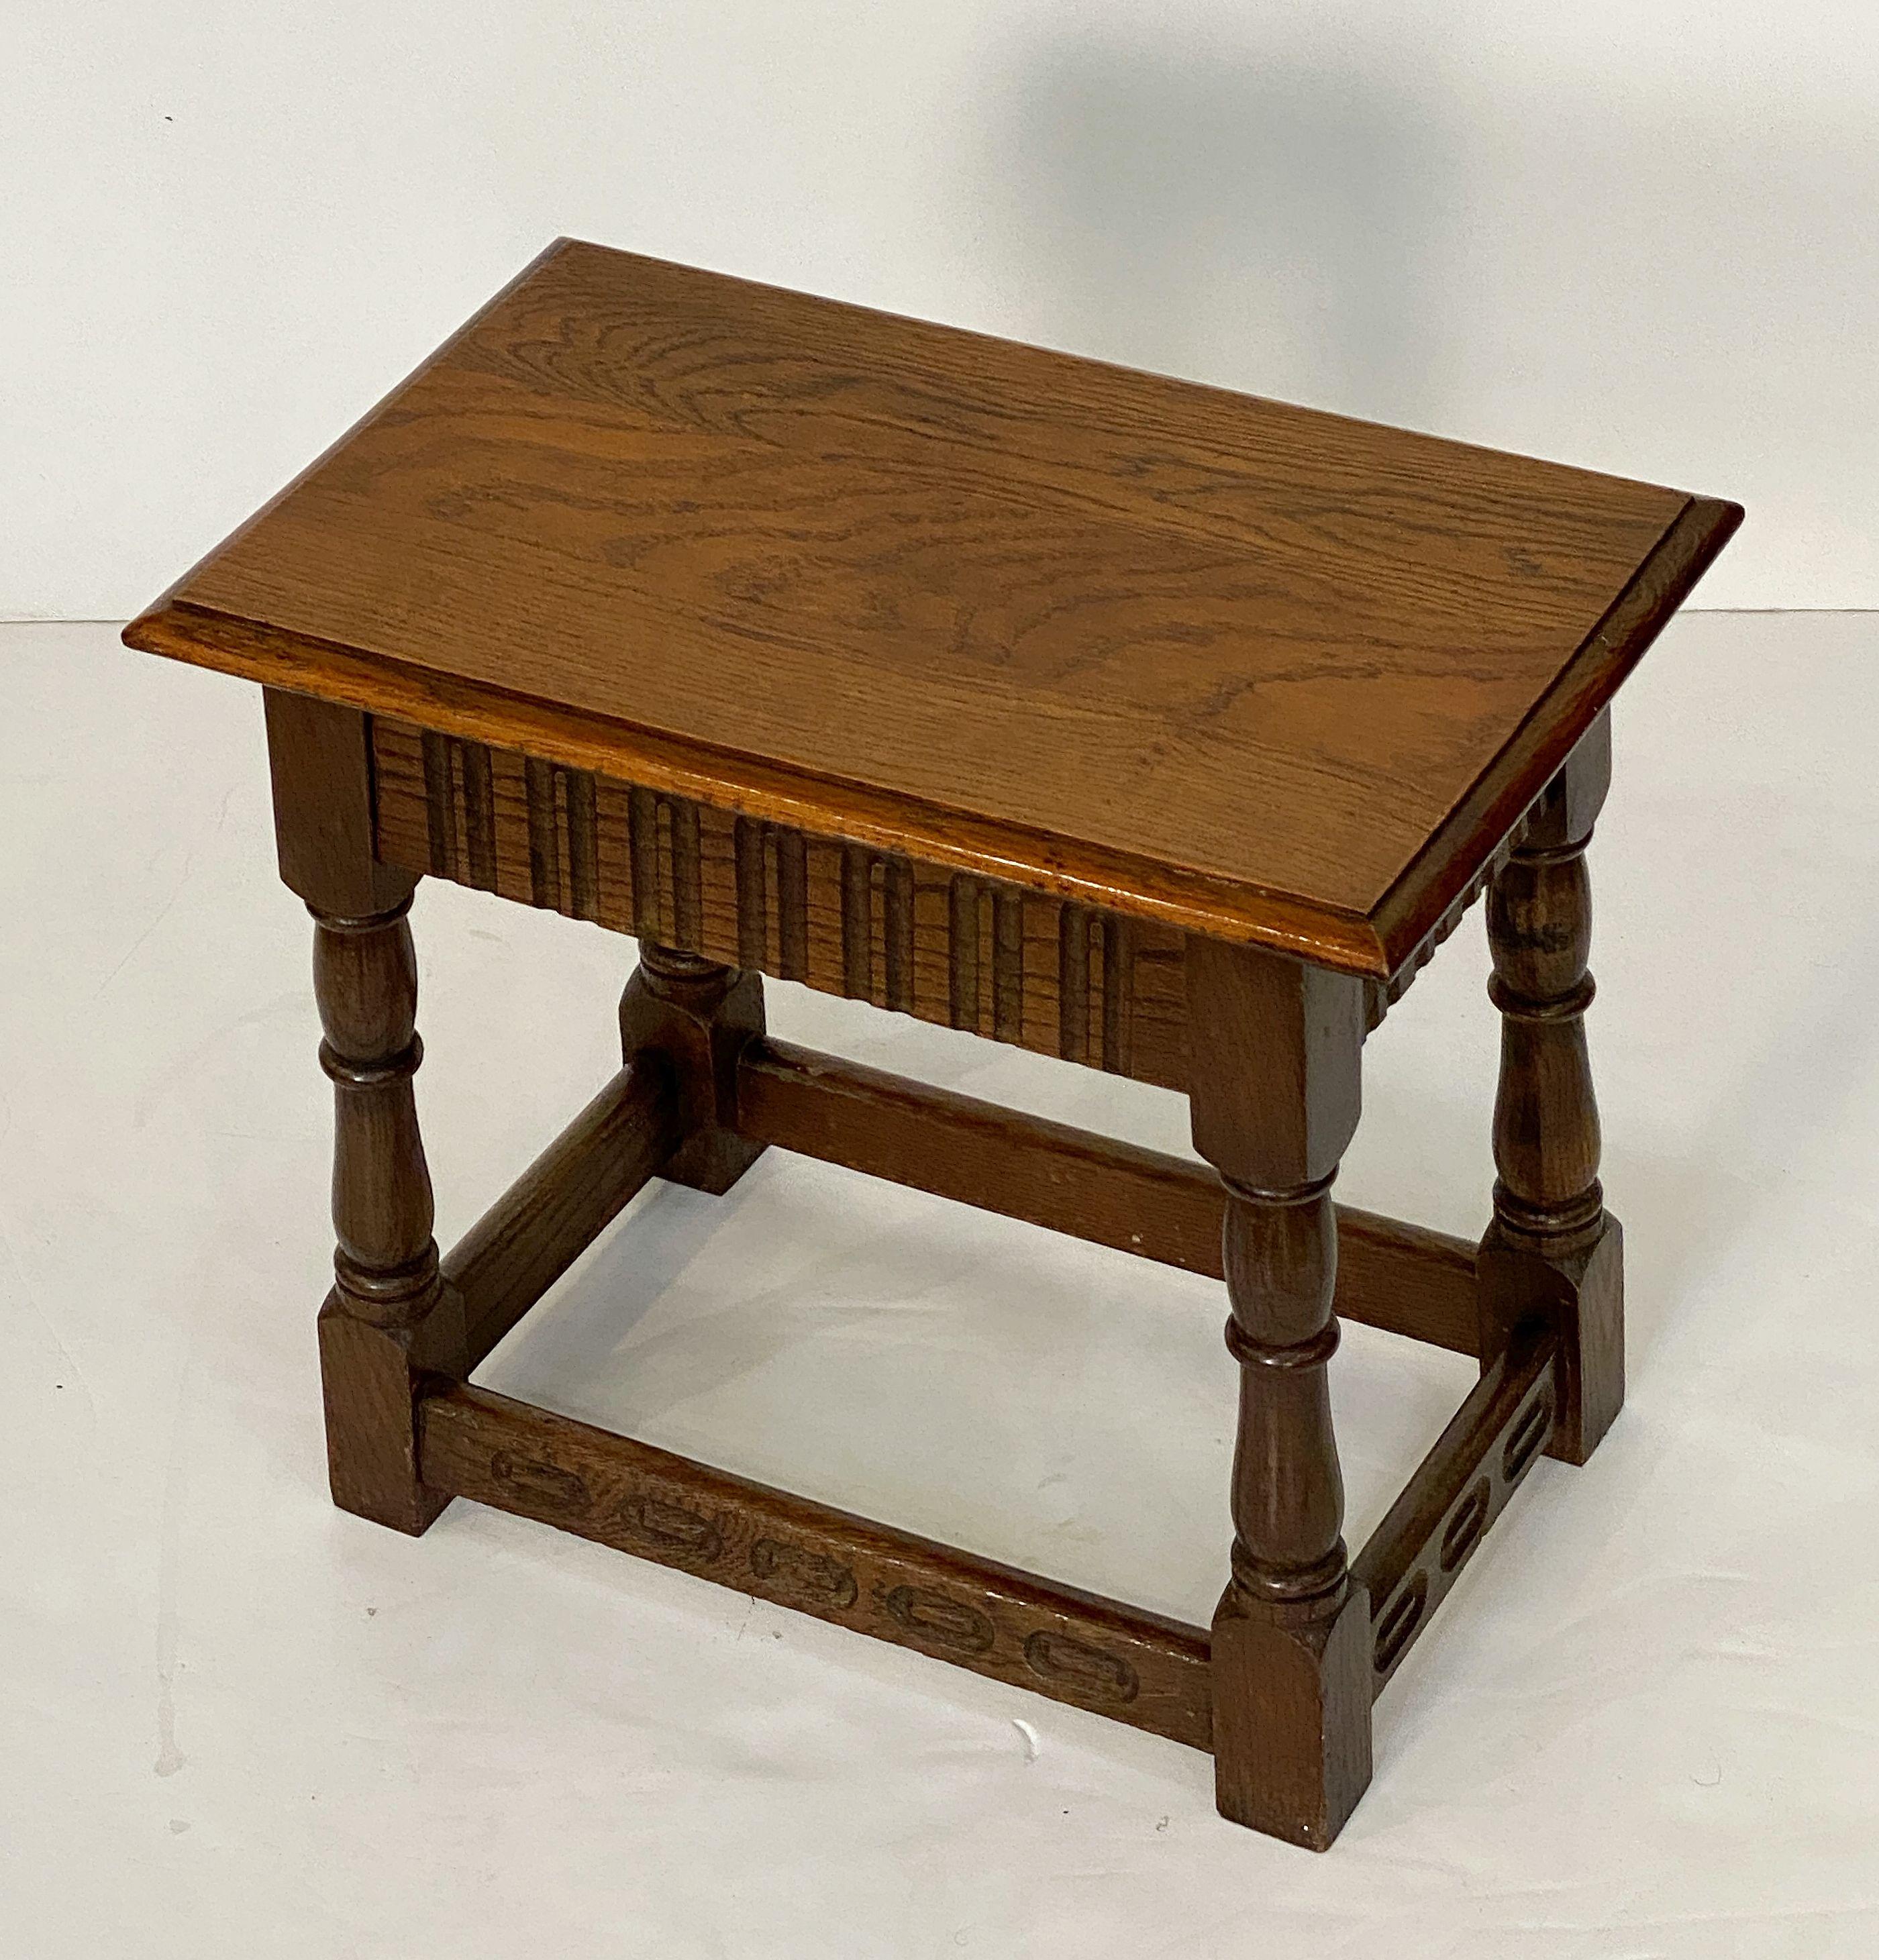 Carved English Joint Stool of Oak with Rectangular Seat and Turned Legs